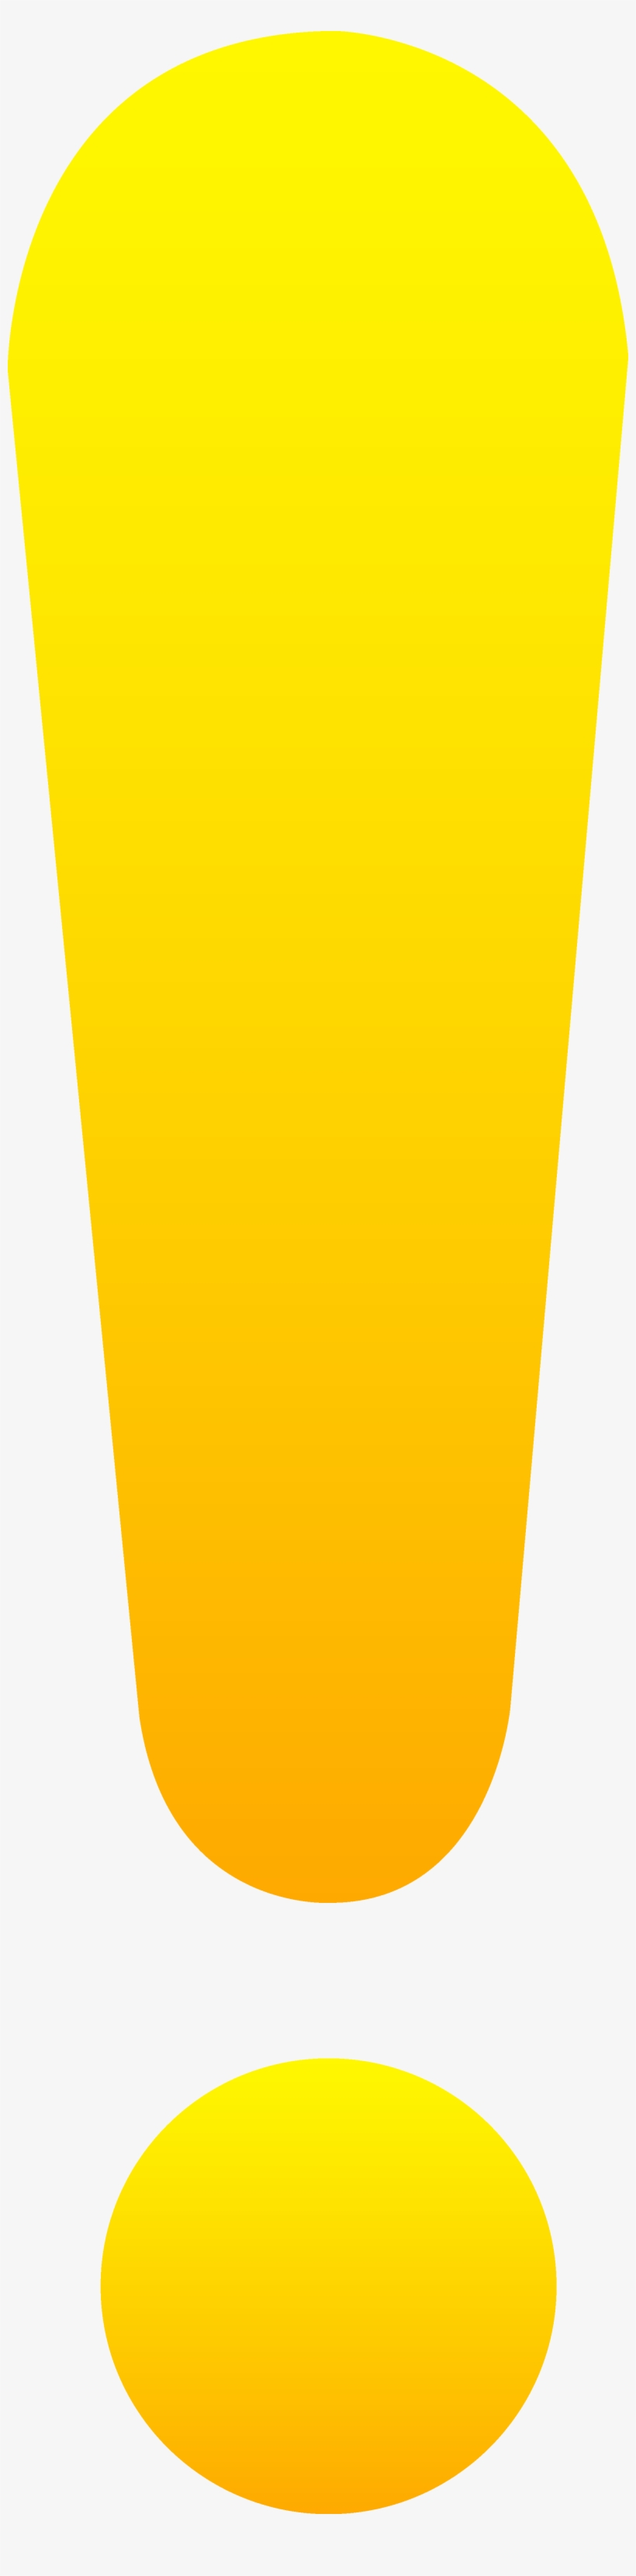 Exclamation Mark Png - Yellow Exclamation Mark Png, transparent png #113124